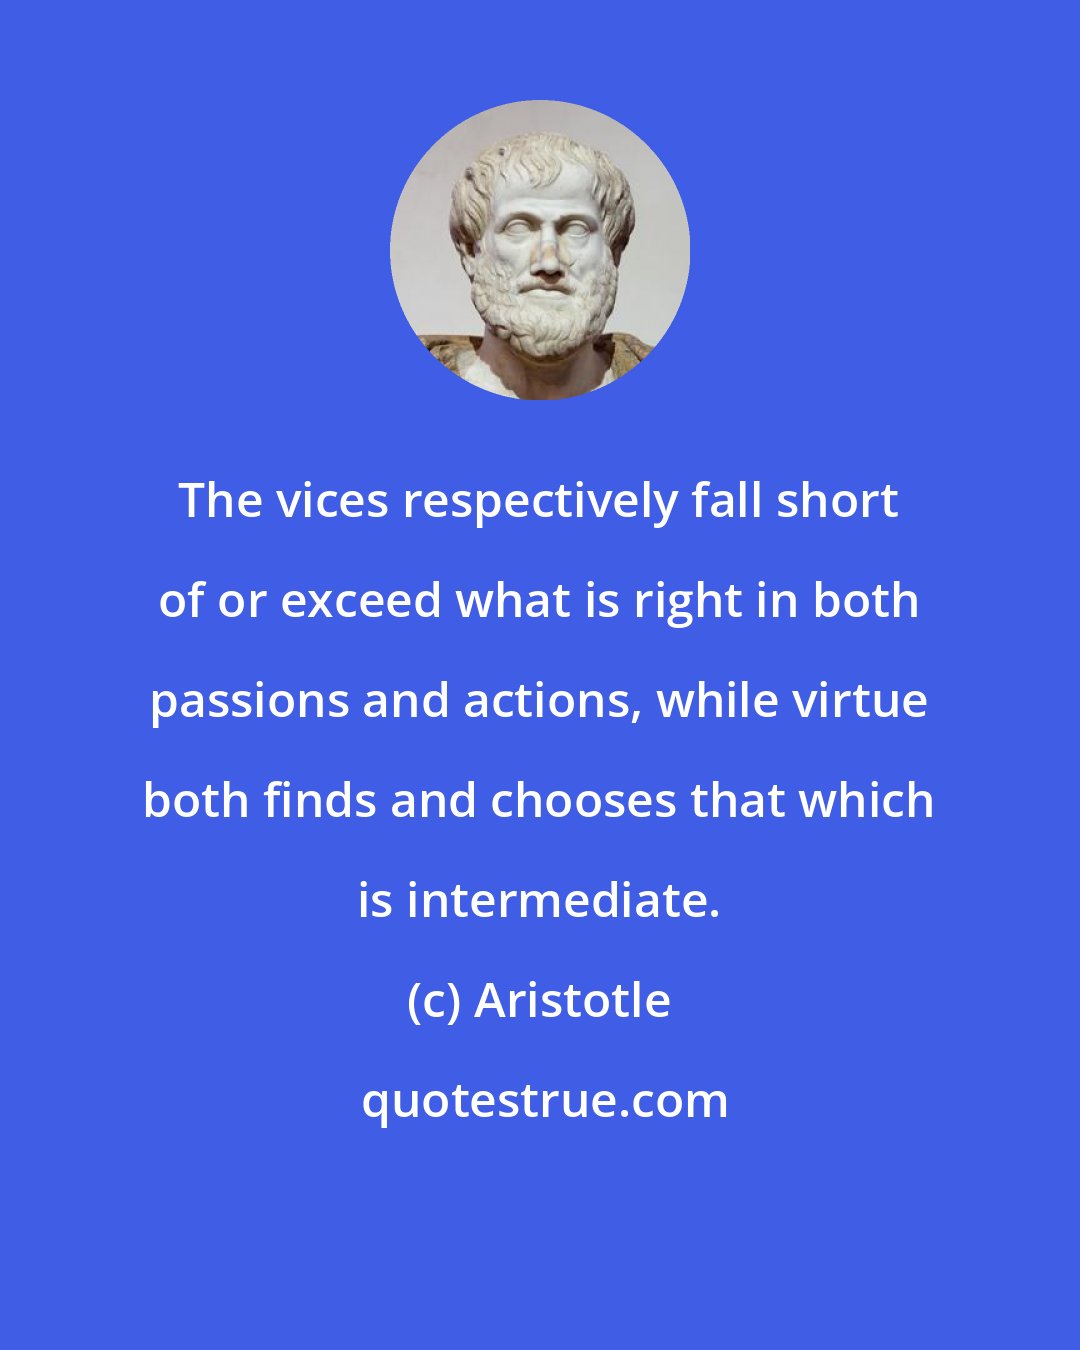 Aristotle: The vices respectively fall short of or exceed what is right in both passions and actions, while virtue both finds and chooses that which is intermediate.